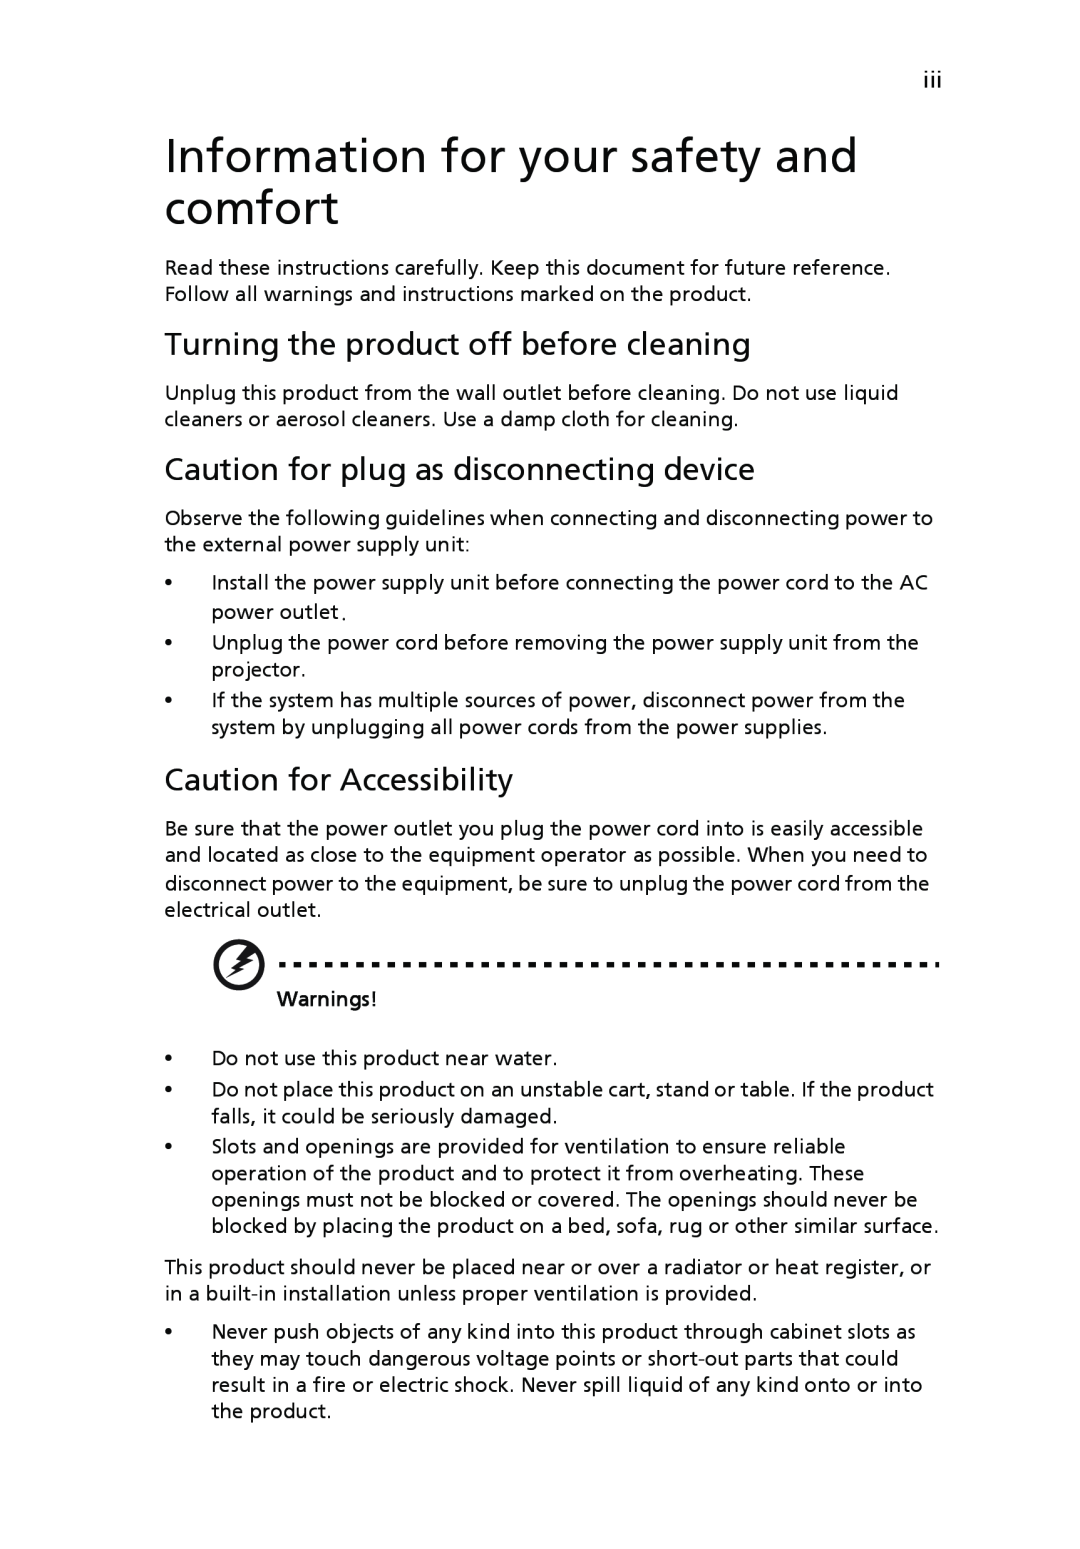 Acer P1266N Information for your safety and comfort, Turning the product off before cleaning, Caution for Accessibility 